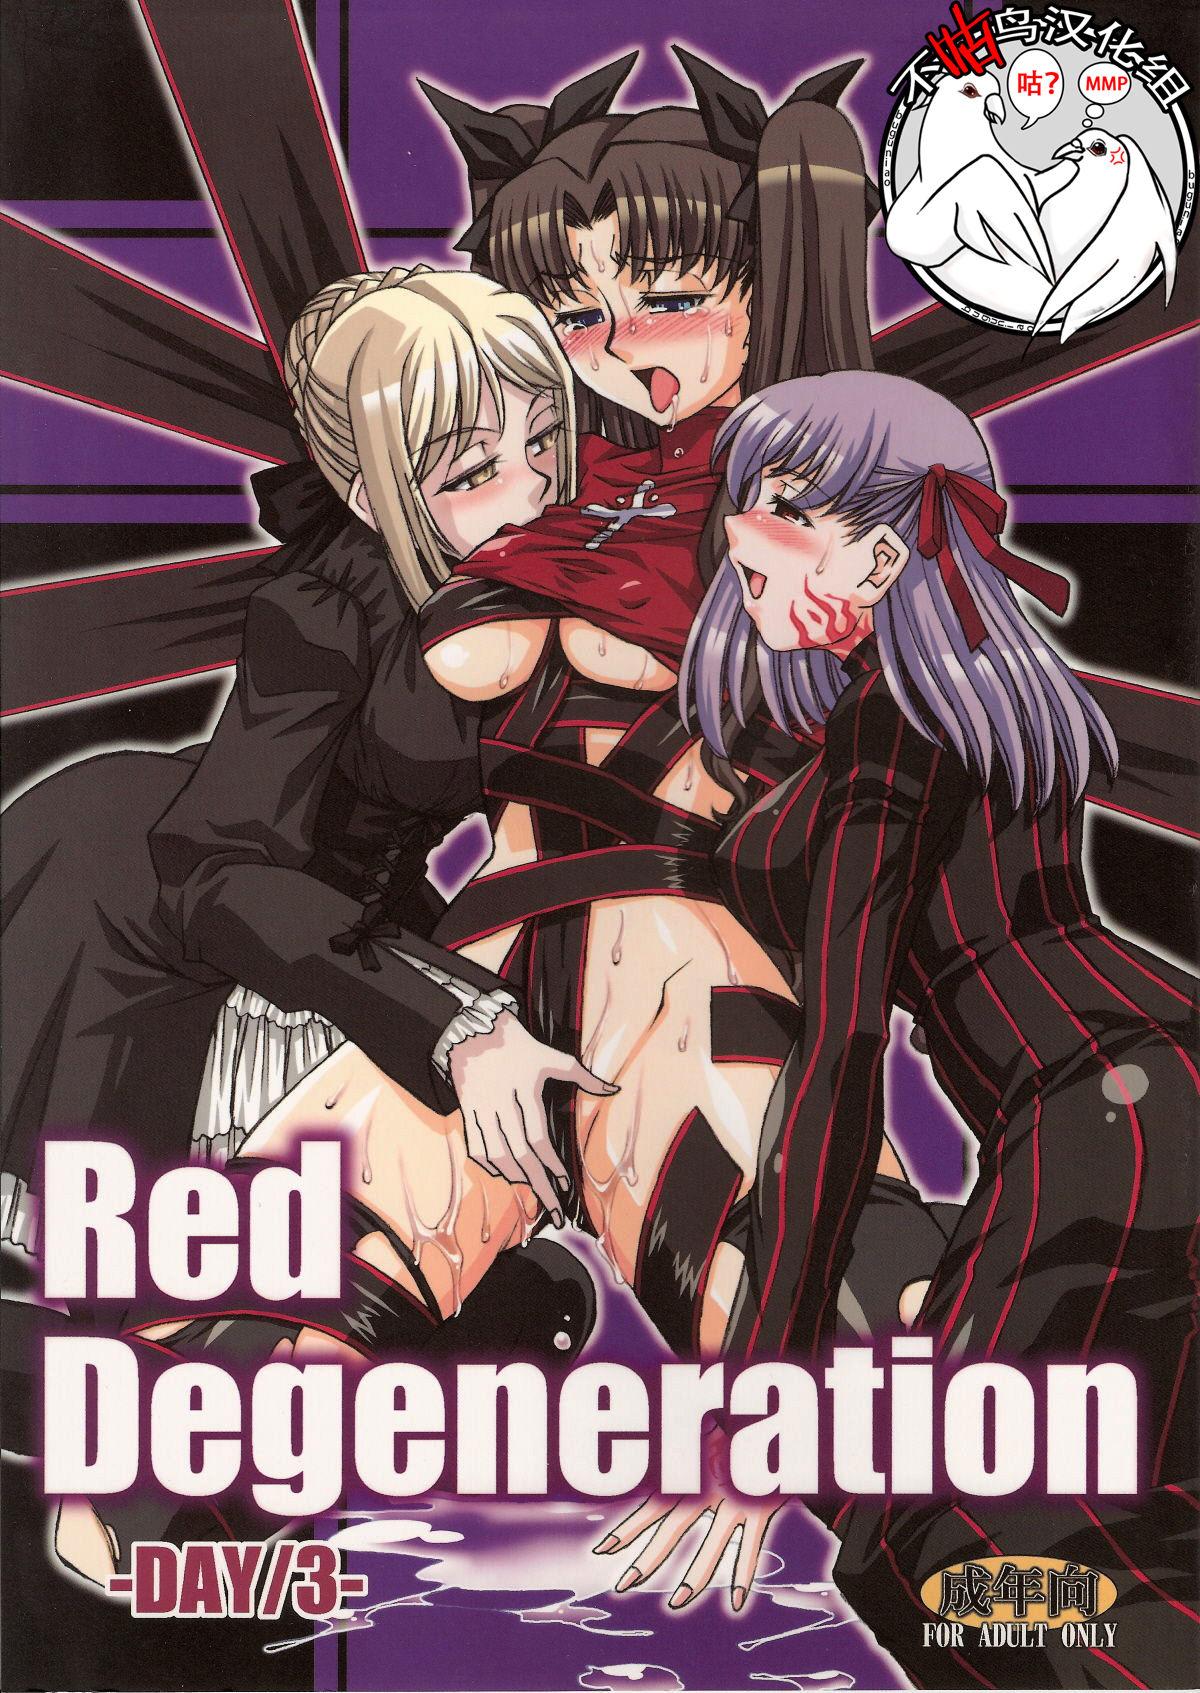 Gay Pov Red Degeneration - Fate stay night Italian - Picture 1